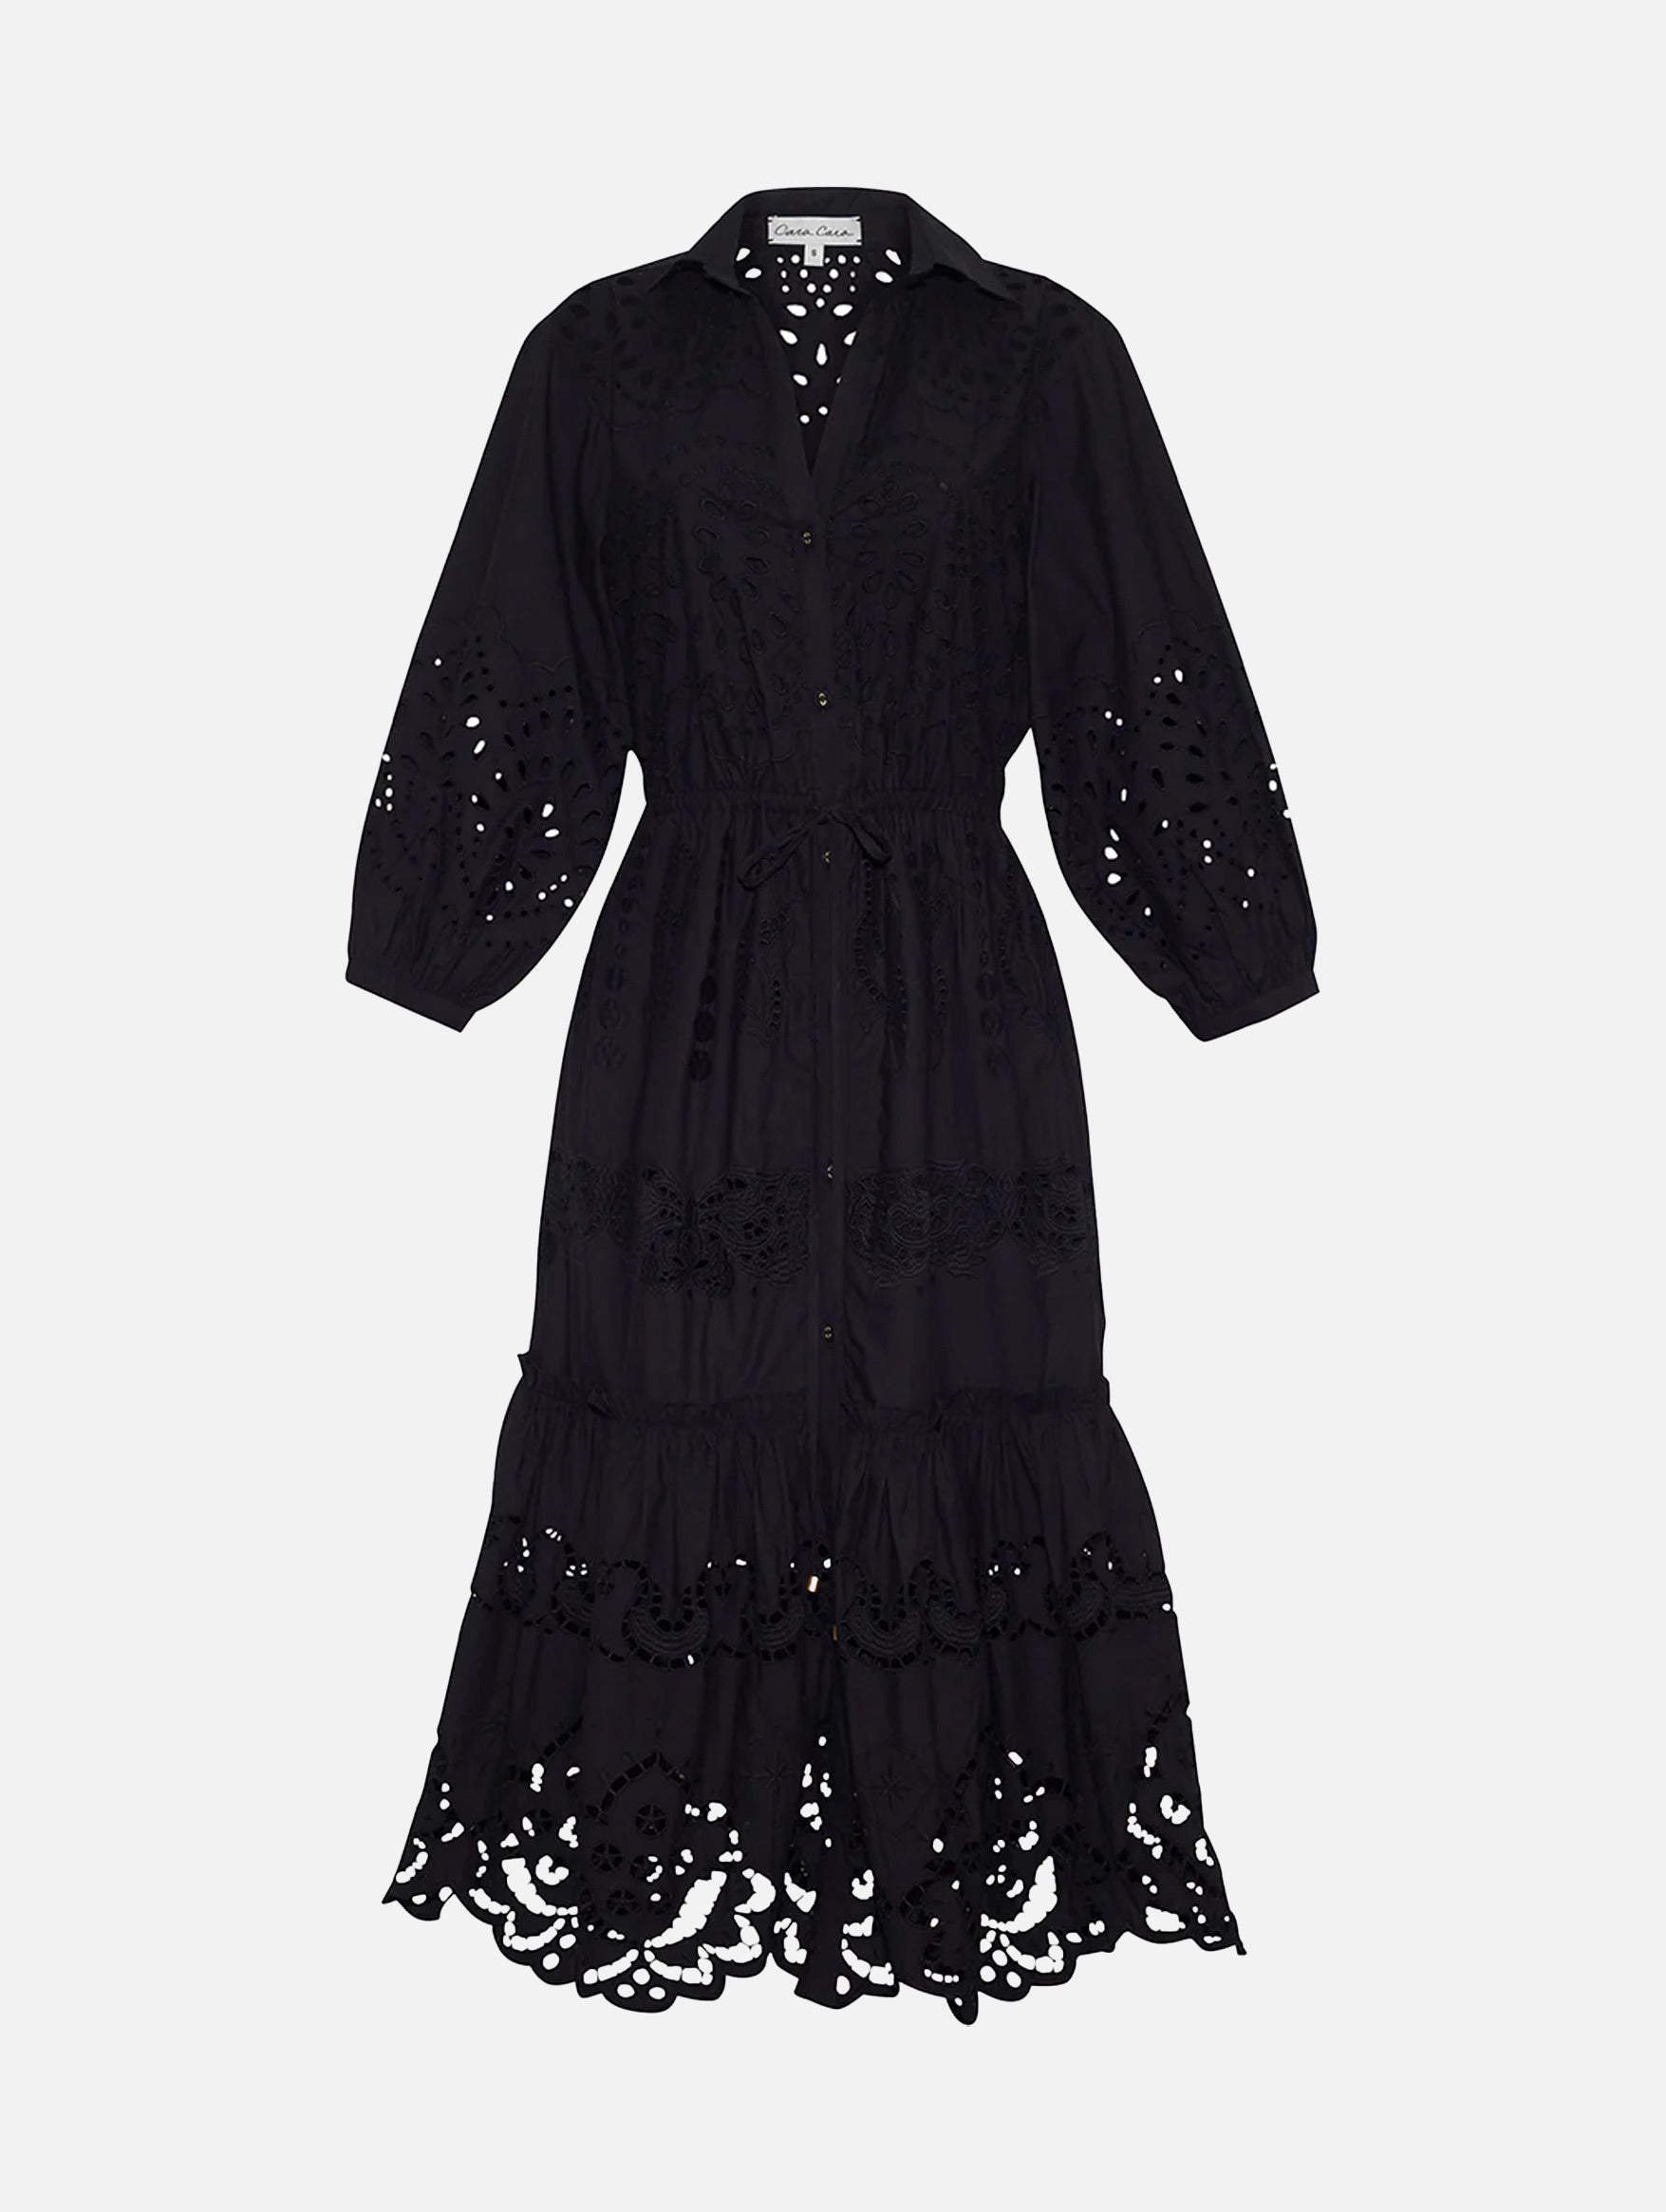 Hutton Dress in Black Embroidered Eyelet